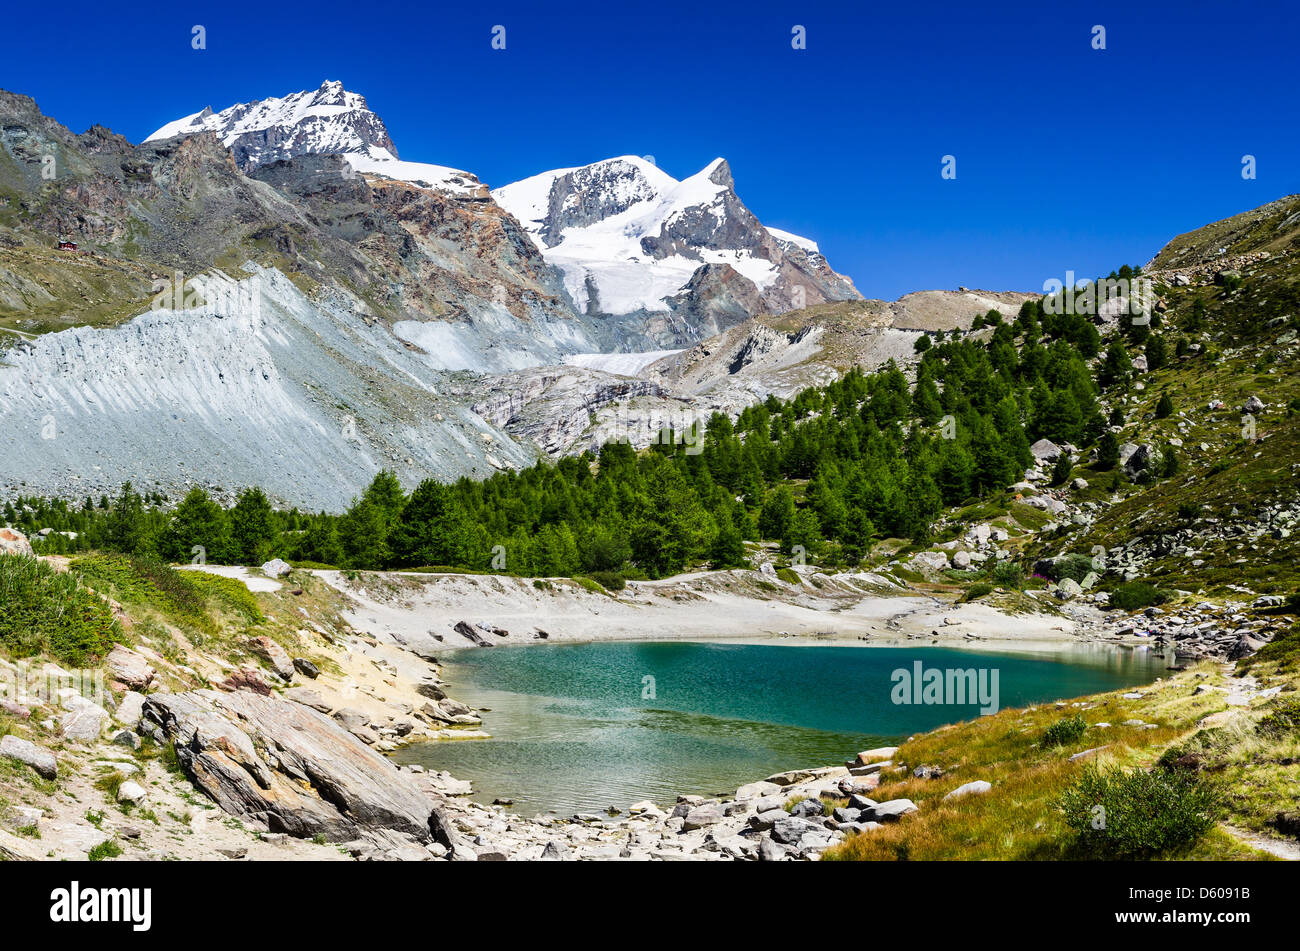 Grunsee, or Green Lake, is a small lake in Swiss Alps near Zermatt, fed by the Findel Glacier. Stock Photo